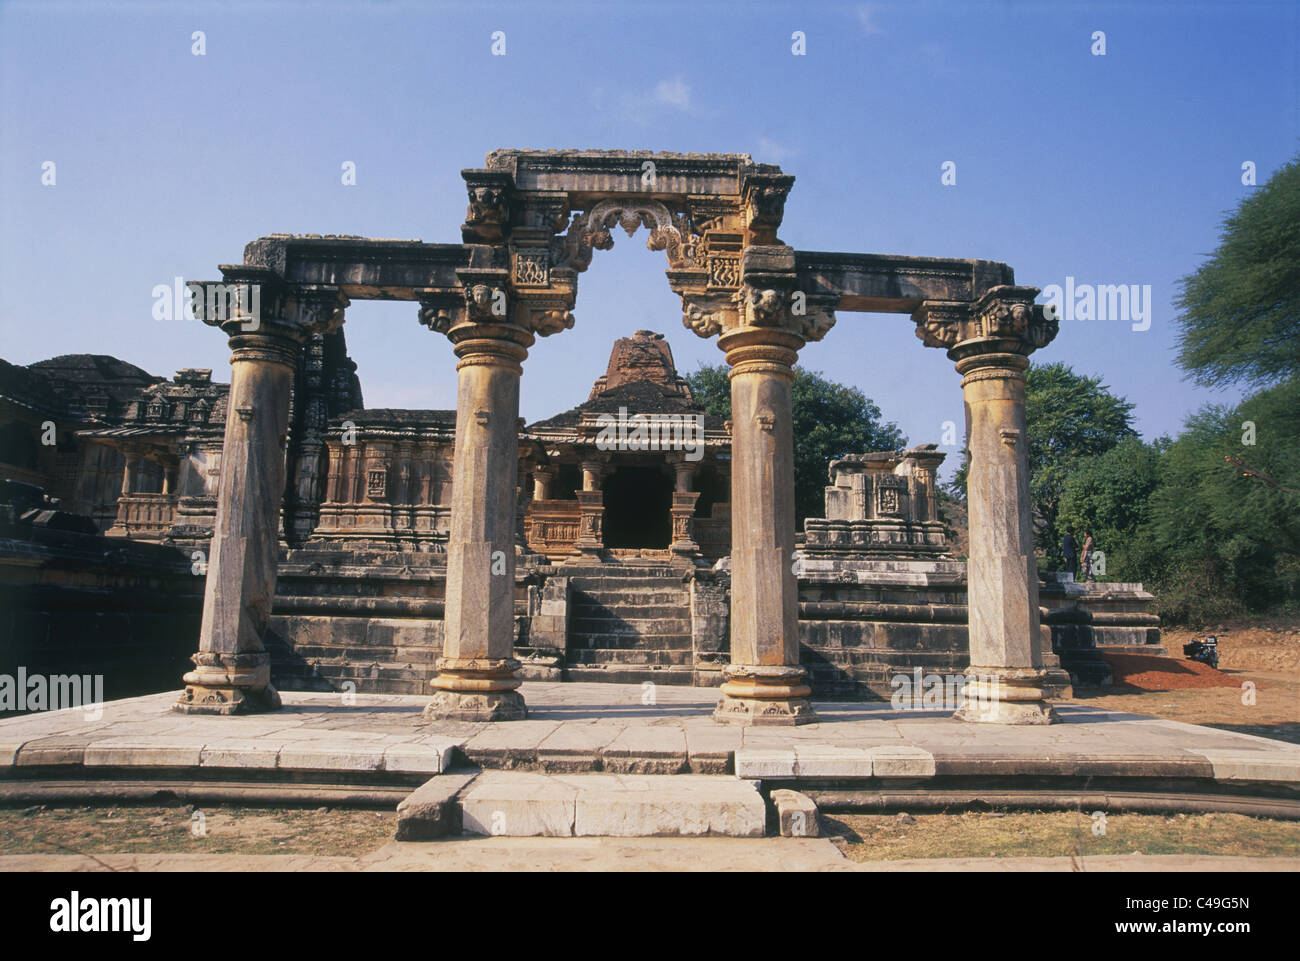 Photograph of an ancient temple in Nagda India Stock Photo